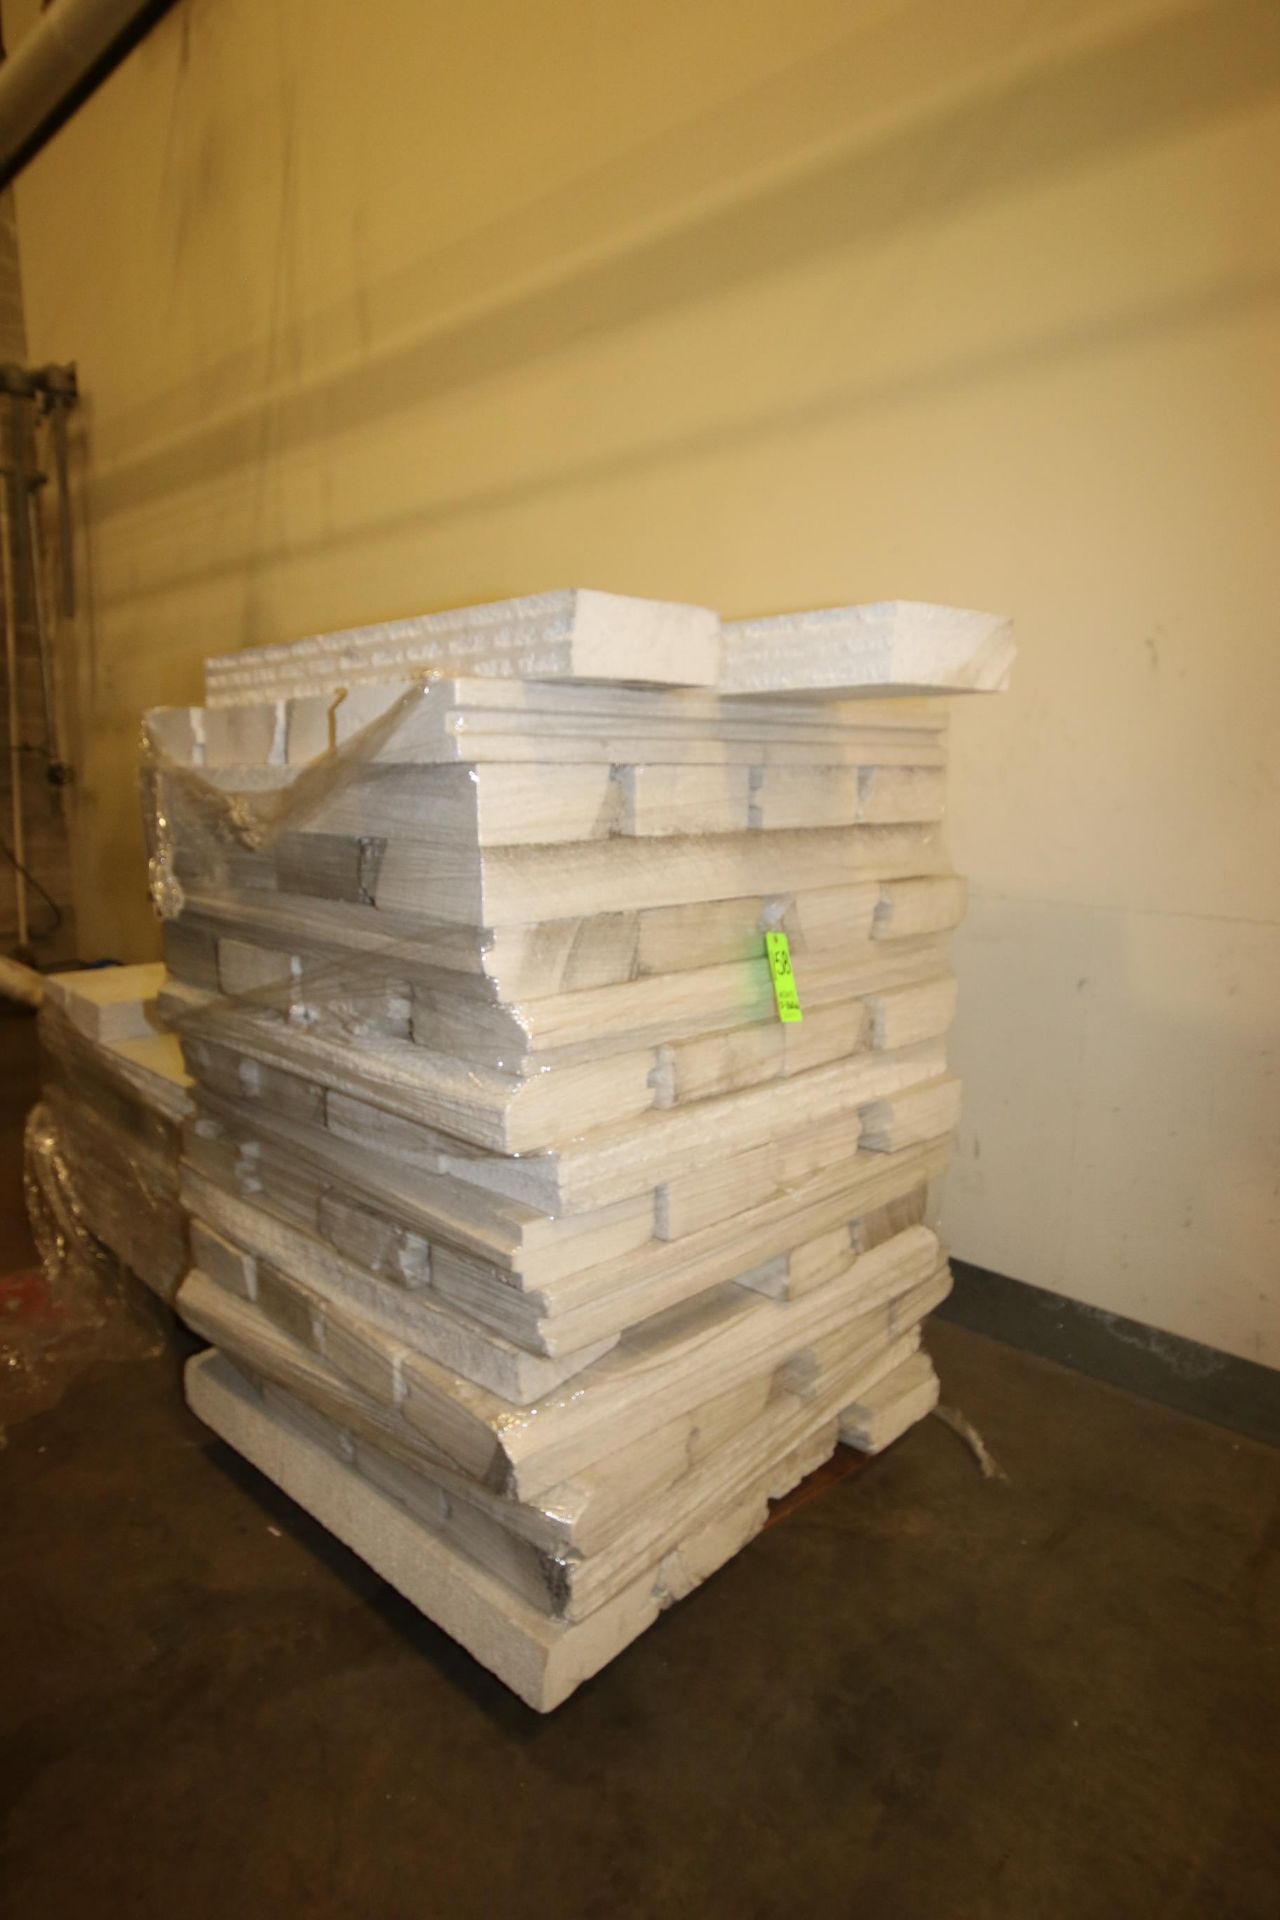 2-Pallets with Aprox. (80) Stryofoam Rectangles, Aprox. 4' L x 11-1/4" W x 4-1/2" Thick